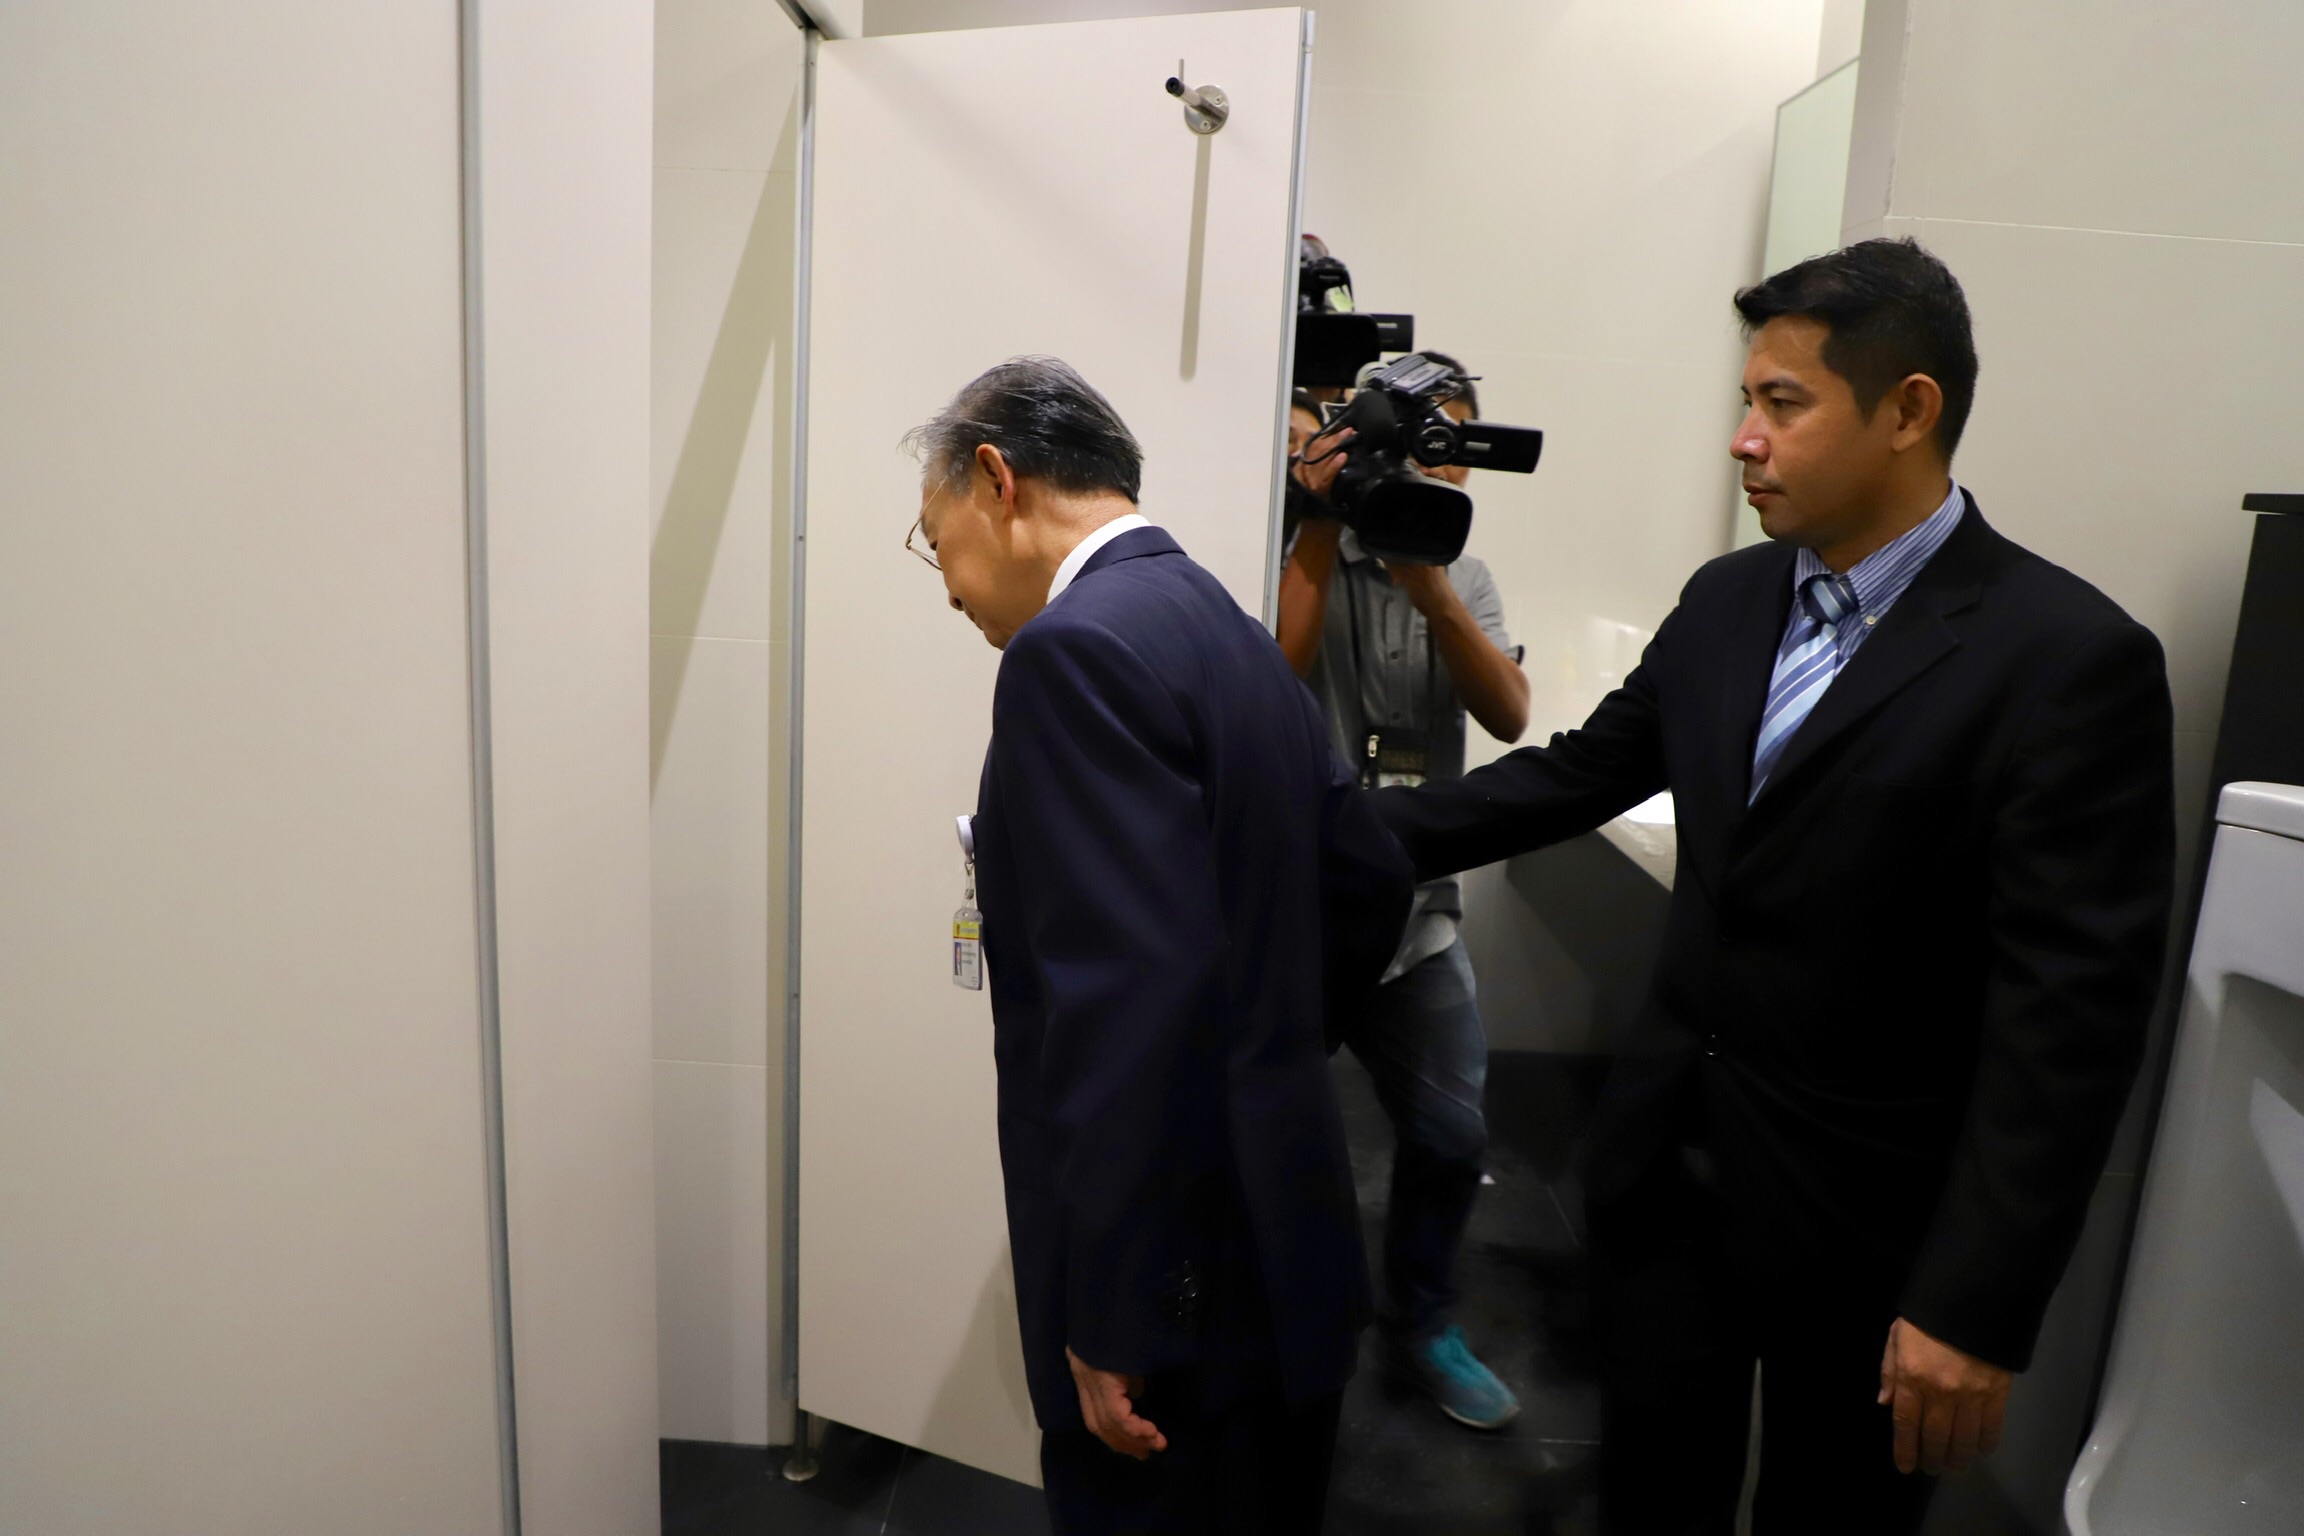 Chuan looking into a toilet cubicle during a hygiene inspection of bathrooms inside the new Parliament building on Aug. 15.